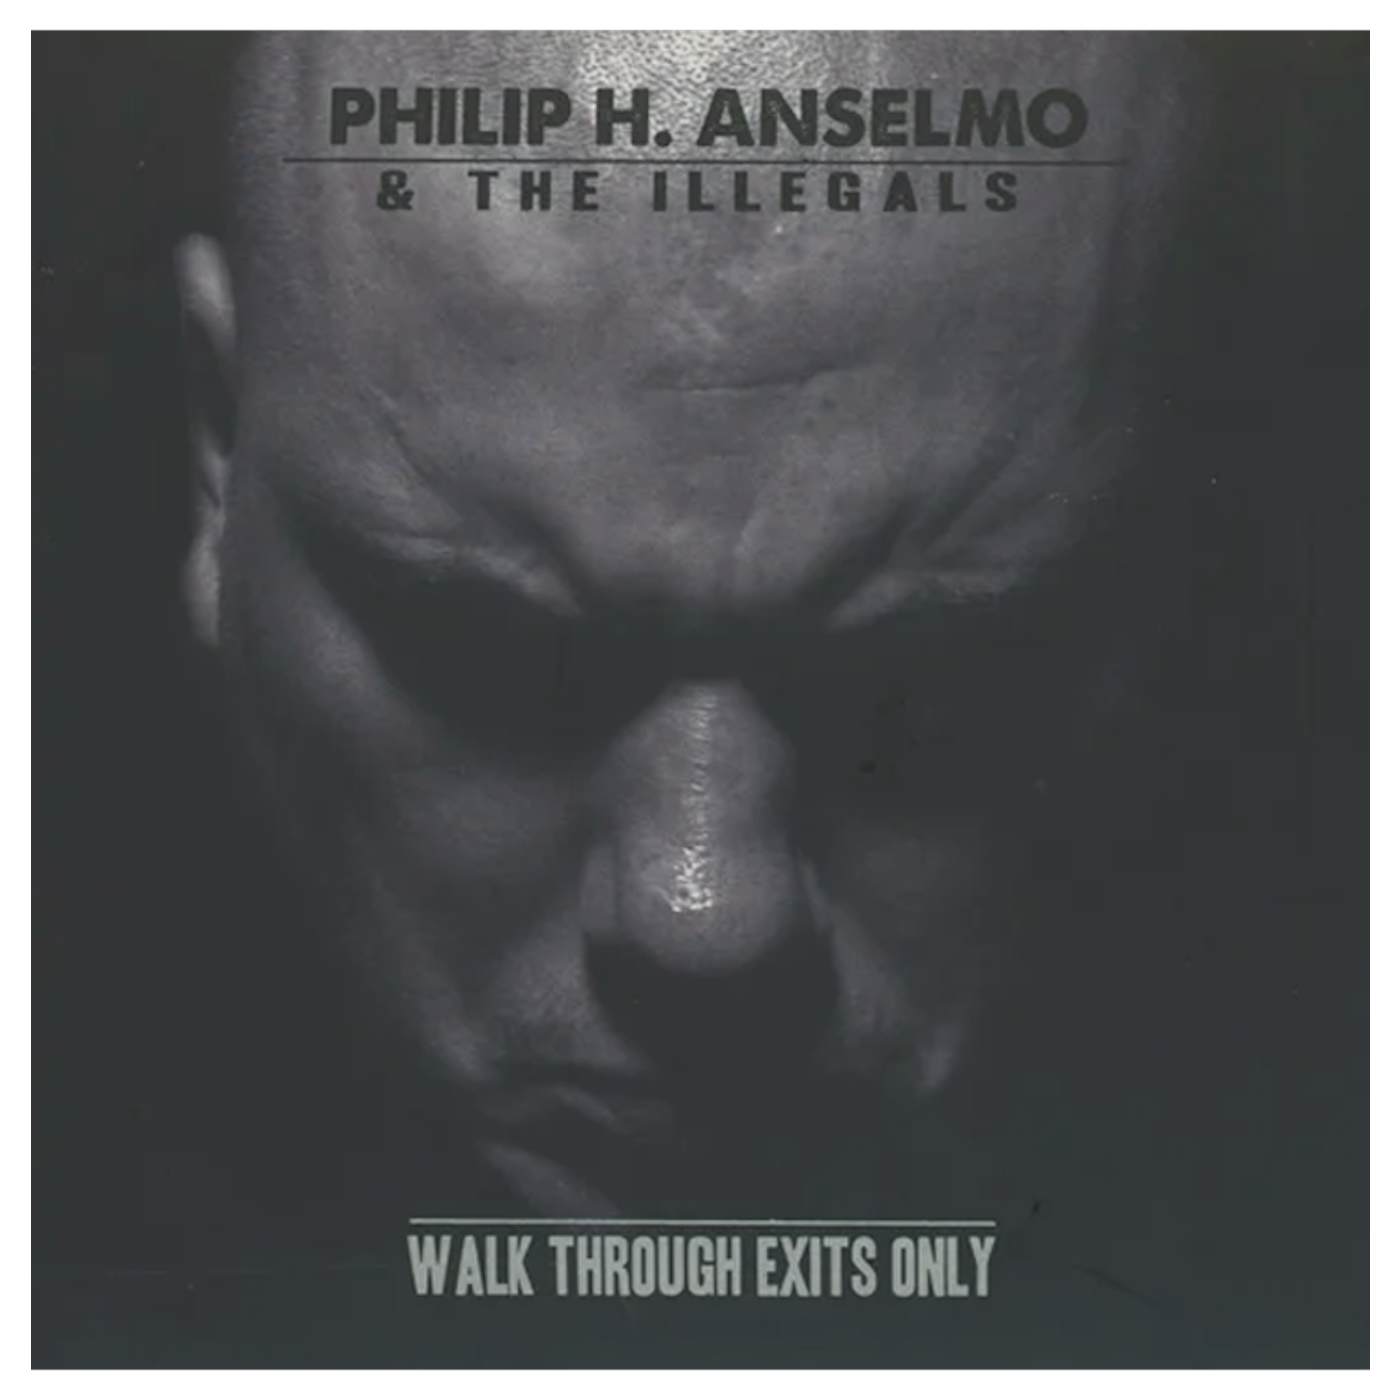 Philip H. Anselmo and The Illegals - 'Walk Through Exits Only' DigiCD